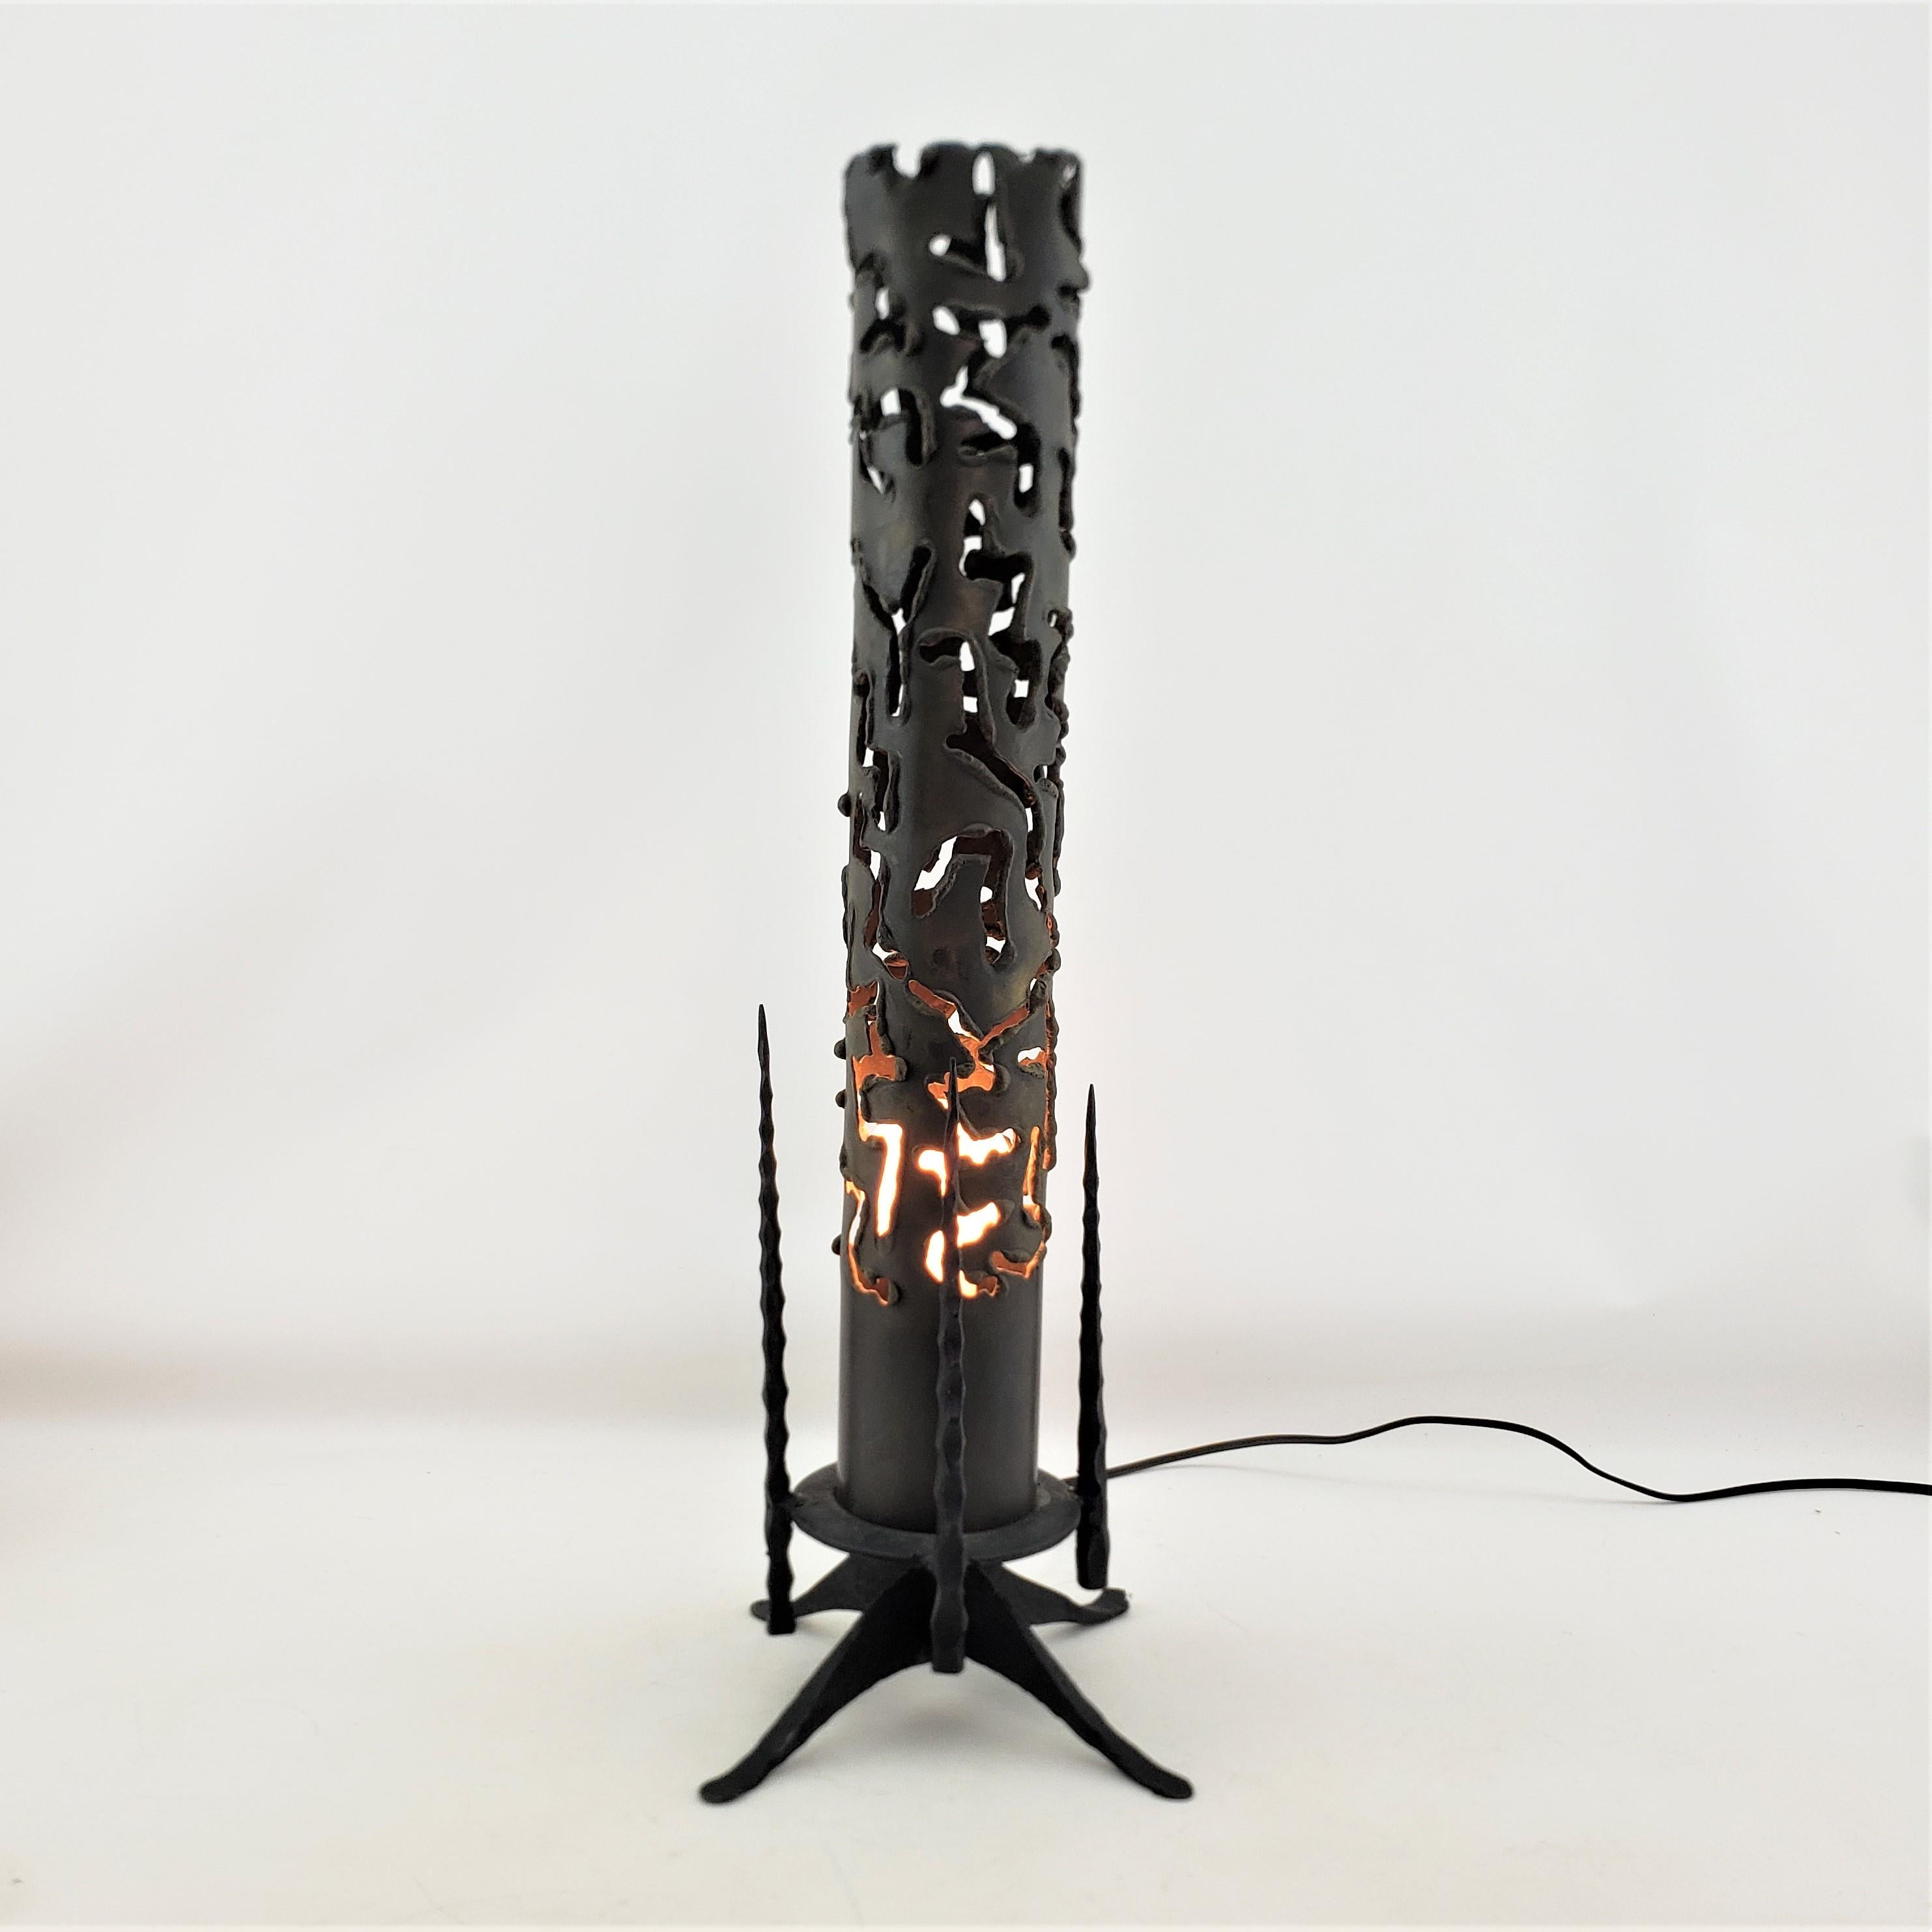 This hand-crafted table lamp or accent light is unsigned, but presumed to have originated from the United States and date to approximately 1965 and done in the period Brutalist style. The lamp is composed of heavy steel featuring a thick torch cut